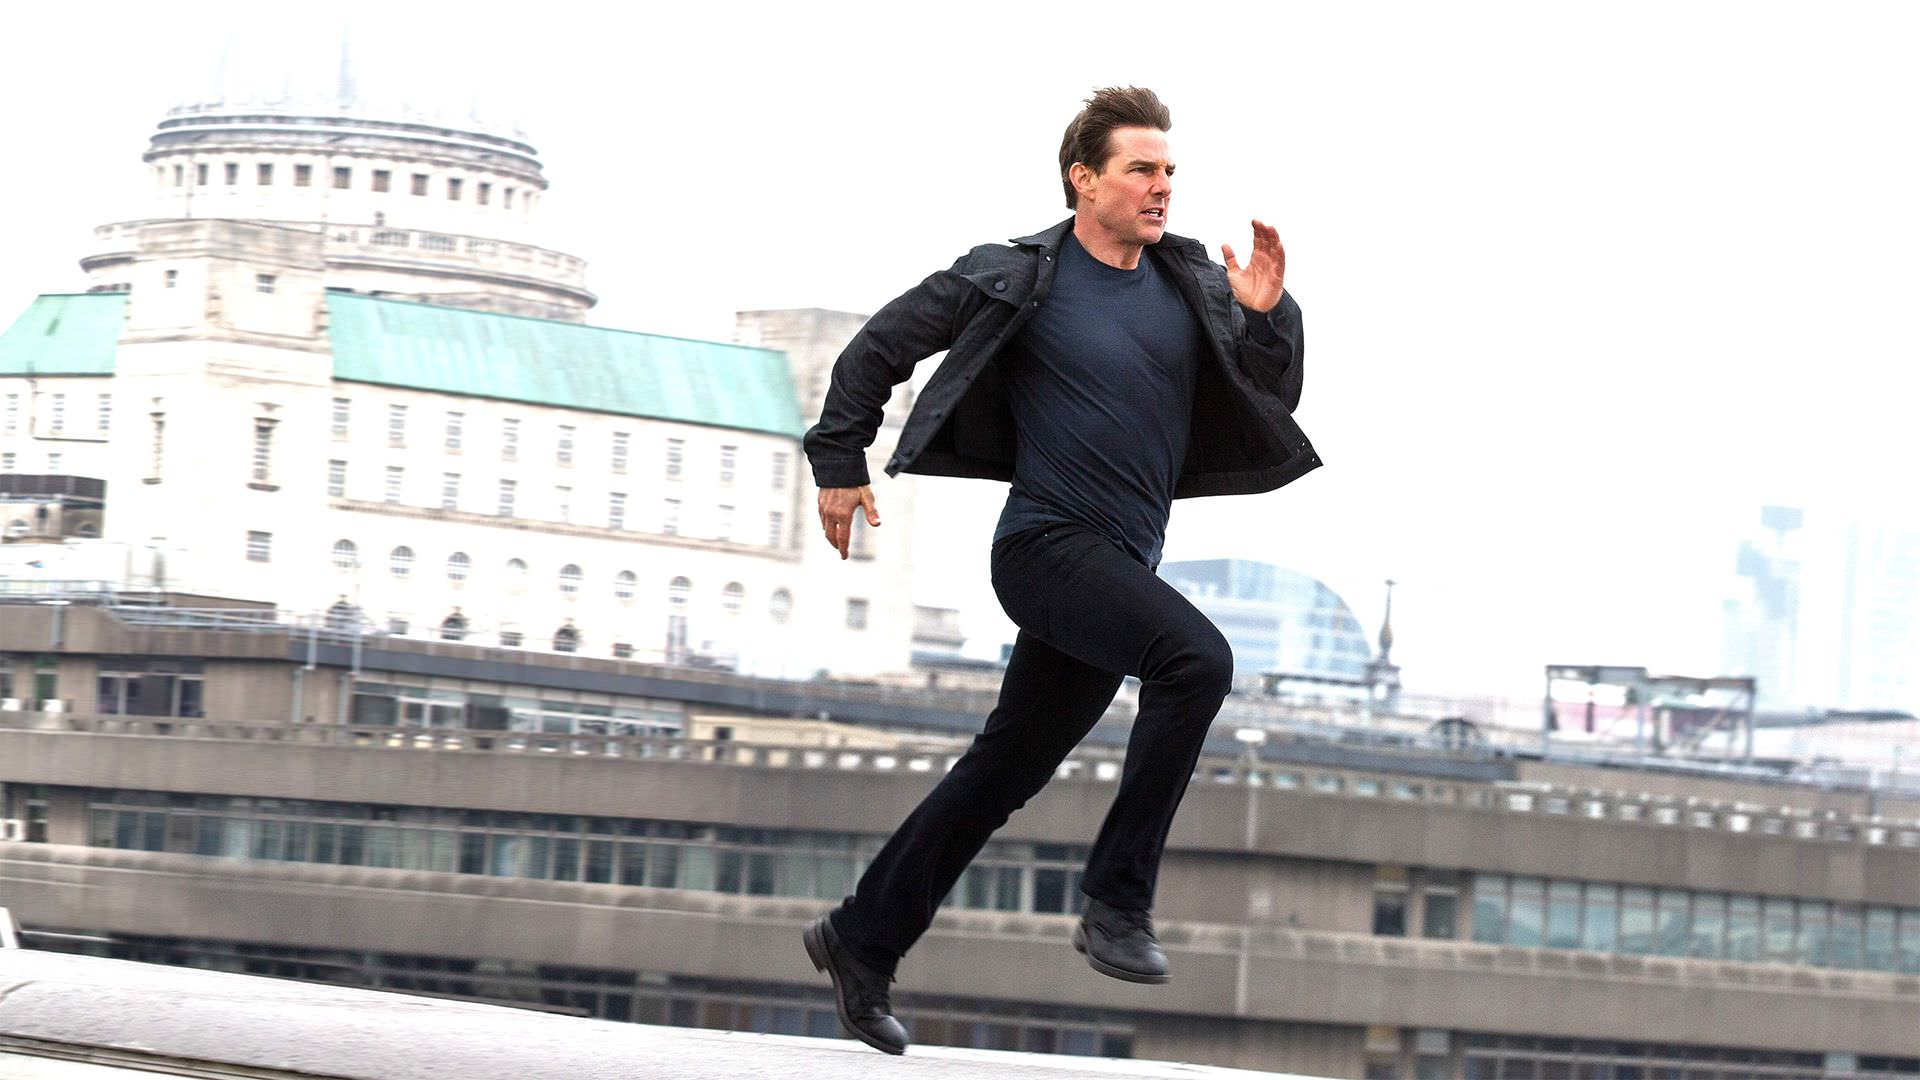 Mission Impossible: Fallout'ta Ethan Hunt rolünde Tom Cruise